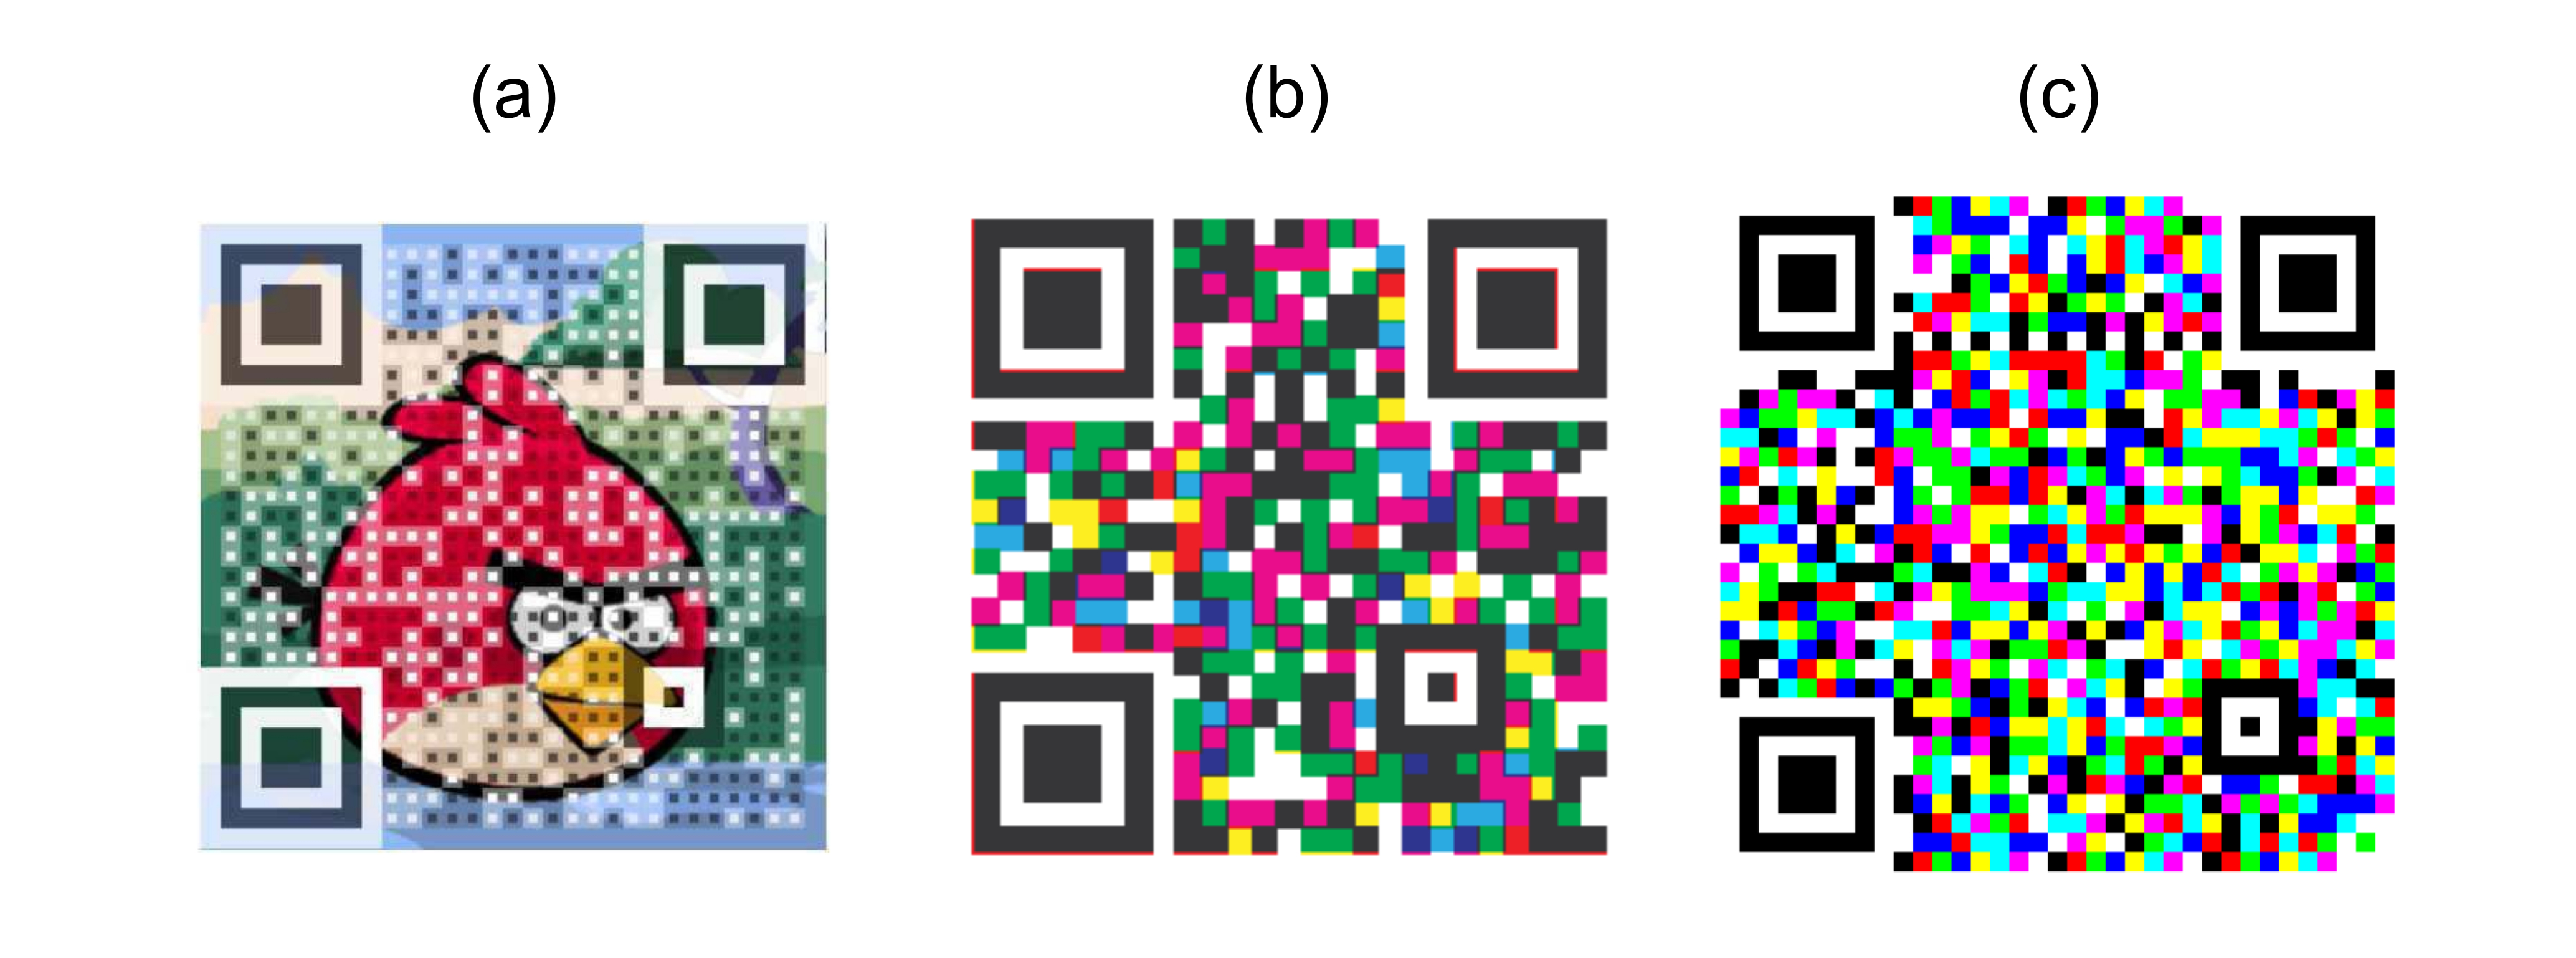 Previous state-of-the-art QR Code variants that implement colors in some fashion. (a) A back-compatible QR Code which embeds an image (© 2014 IEEE) [57]. (b) A RGB implementation of QR Codes where 3 different QR Codes are packed, one in each CMY channel. Each channel is back-compatible, although the resulting image is not (© 2013 IEEE) [130]. (c) A High Capacity Color Barcode, a re-implementation of a QR Code standard using colors, which is not back-compatible with QR Codes (© 2010 IEEE) [133].